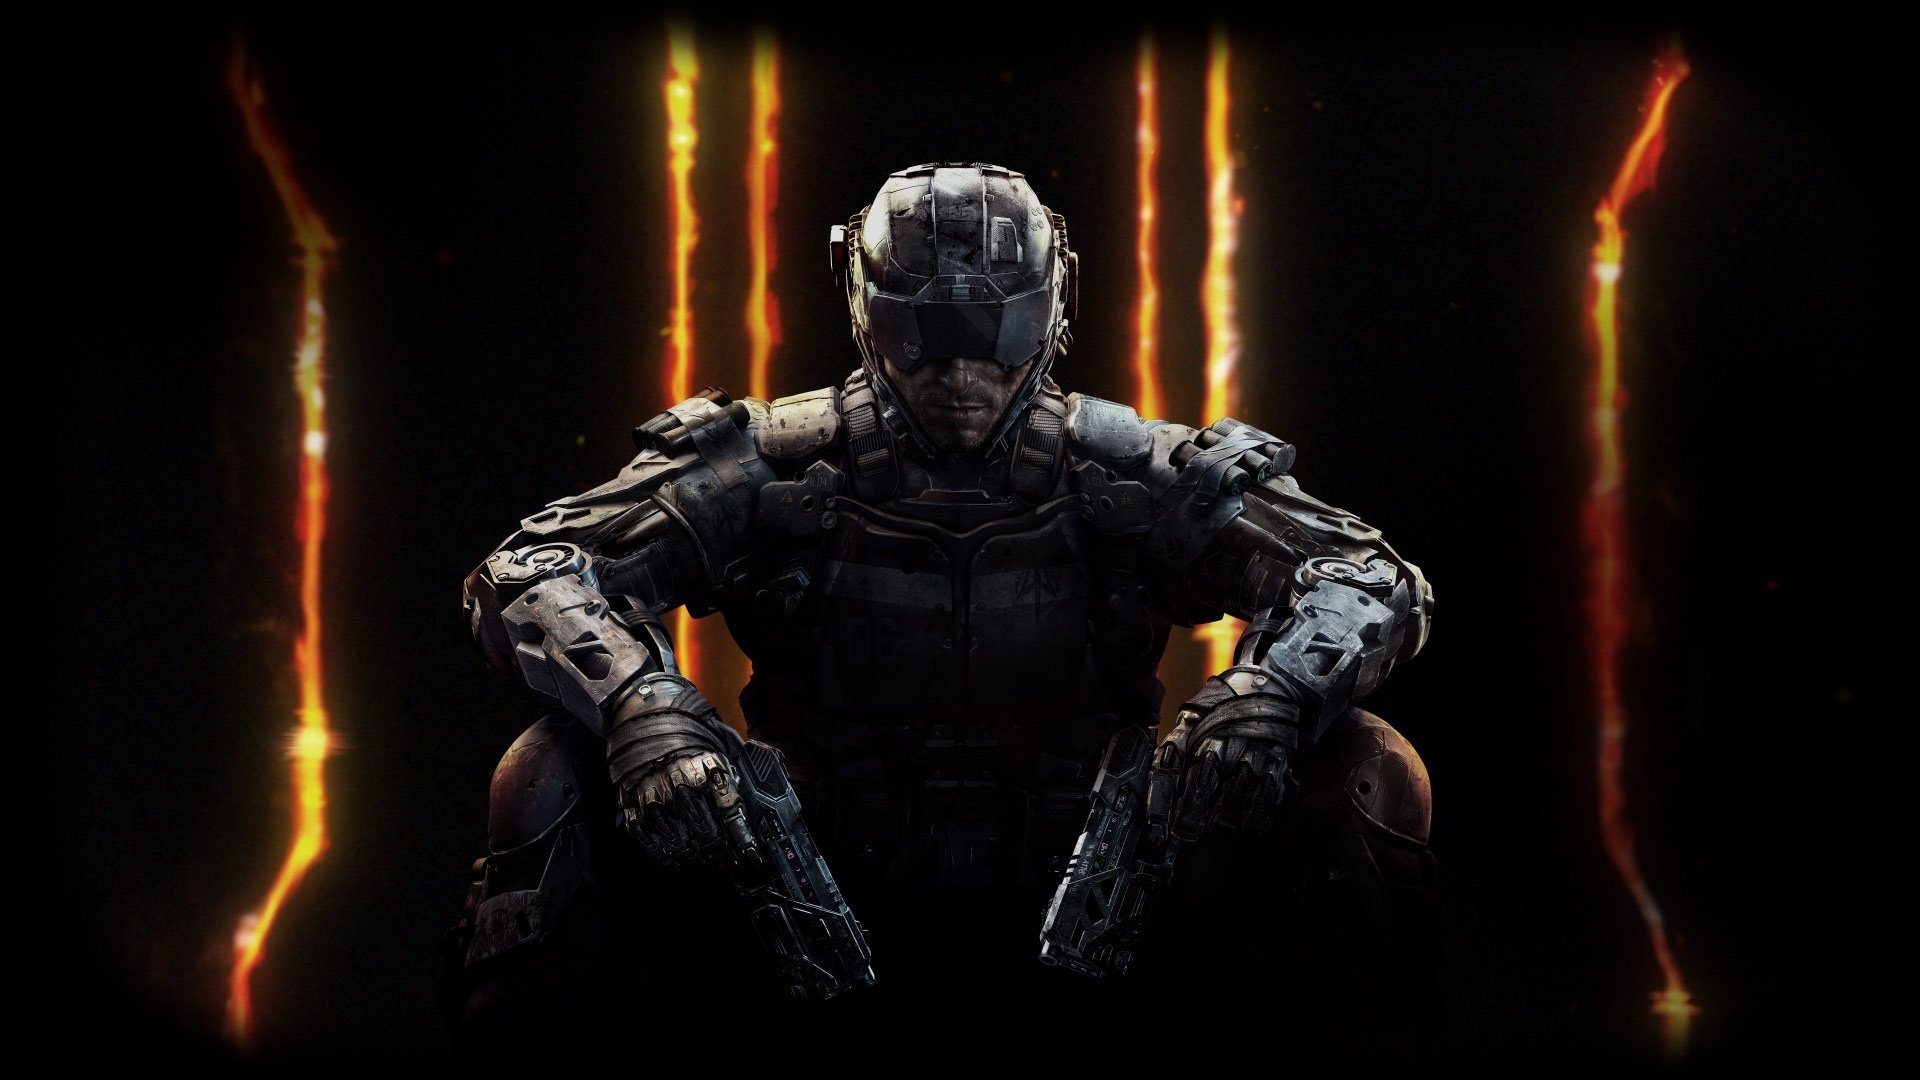 40 Call Of Duty: Black Ops III HD Wallpapers | Backgrounds